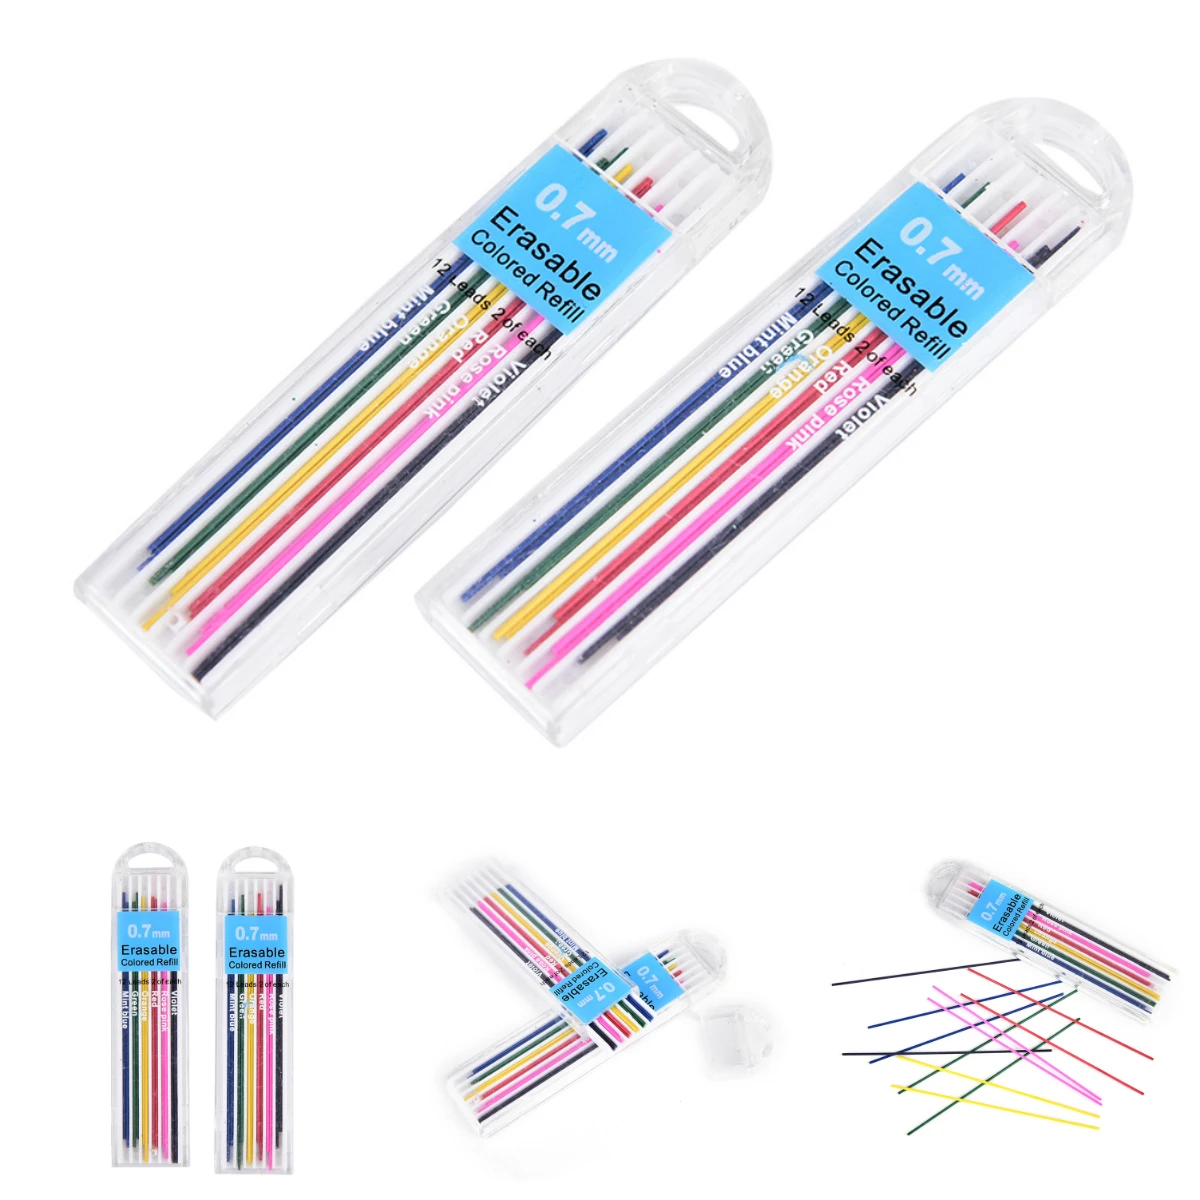 

6color 2pcs/color 0.7 mm Mechanical Pencil color lead Refill office & school writing Drawing supplies Colored